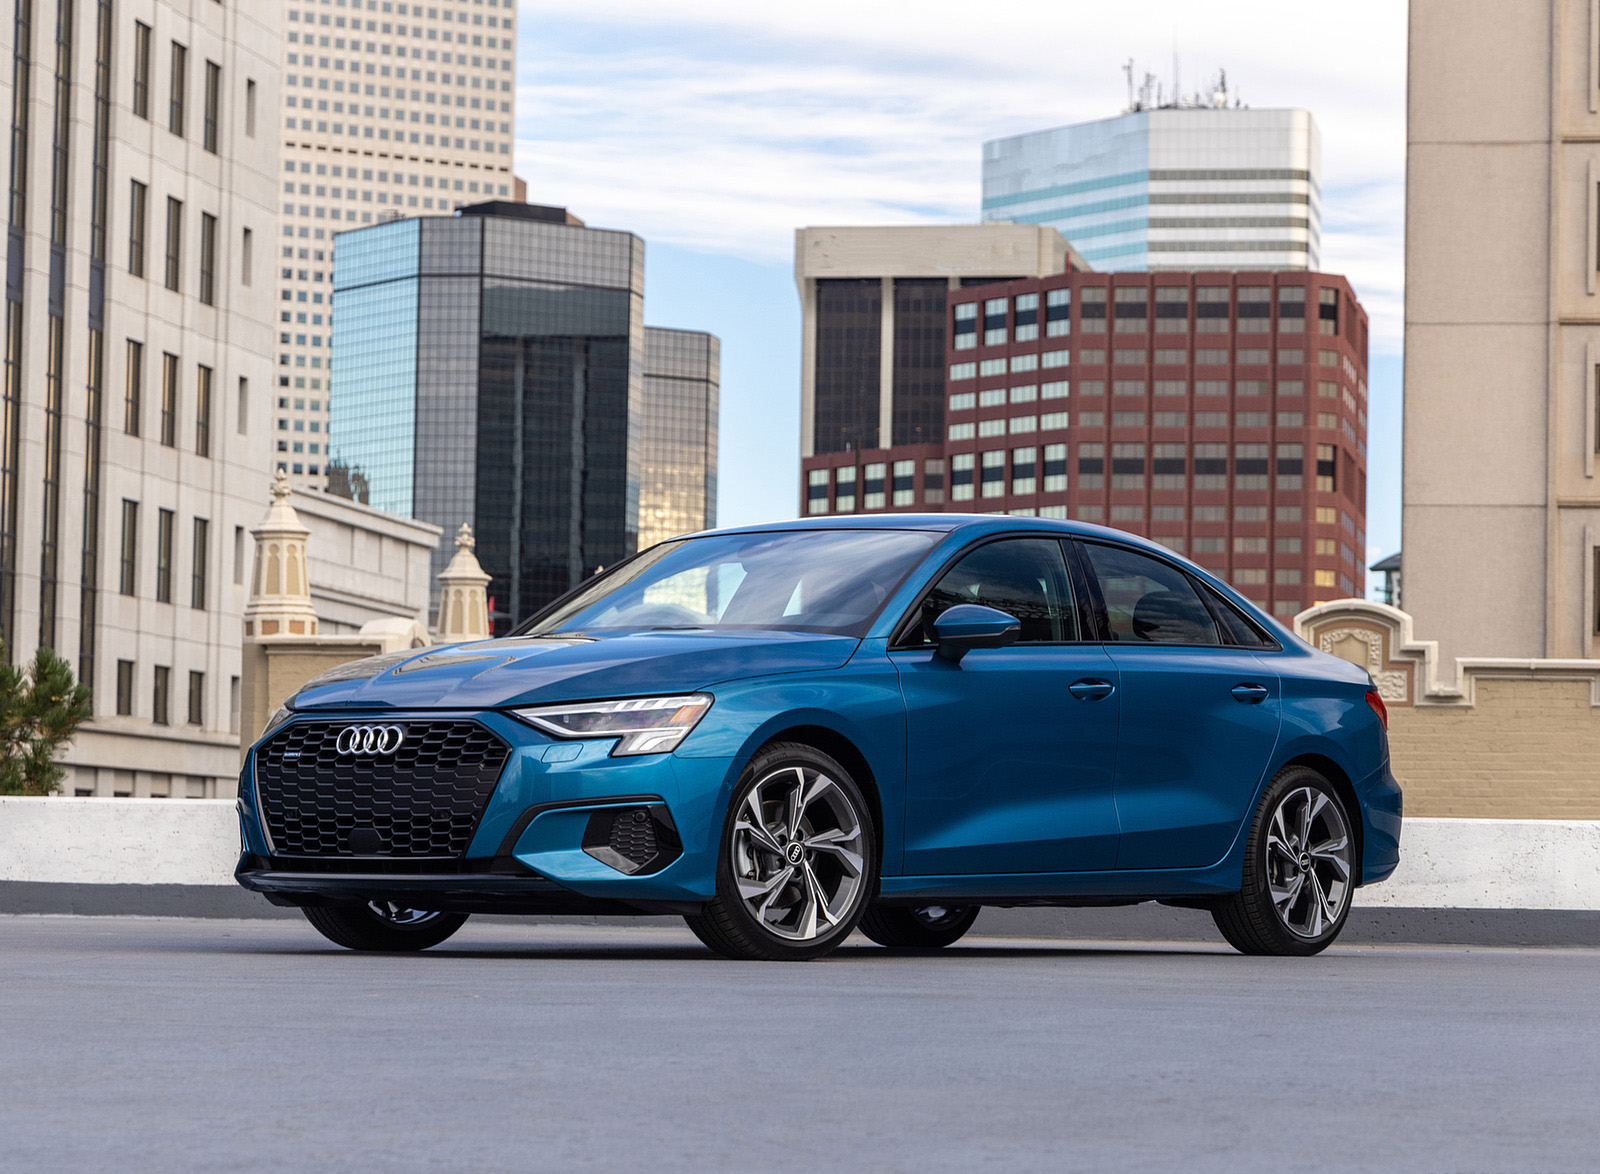 2022 Audi A3 (Color: Atoll Blue; US-Spec) Front Three-Quarter Wallpapers  #28 of 58